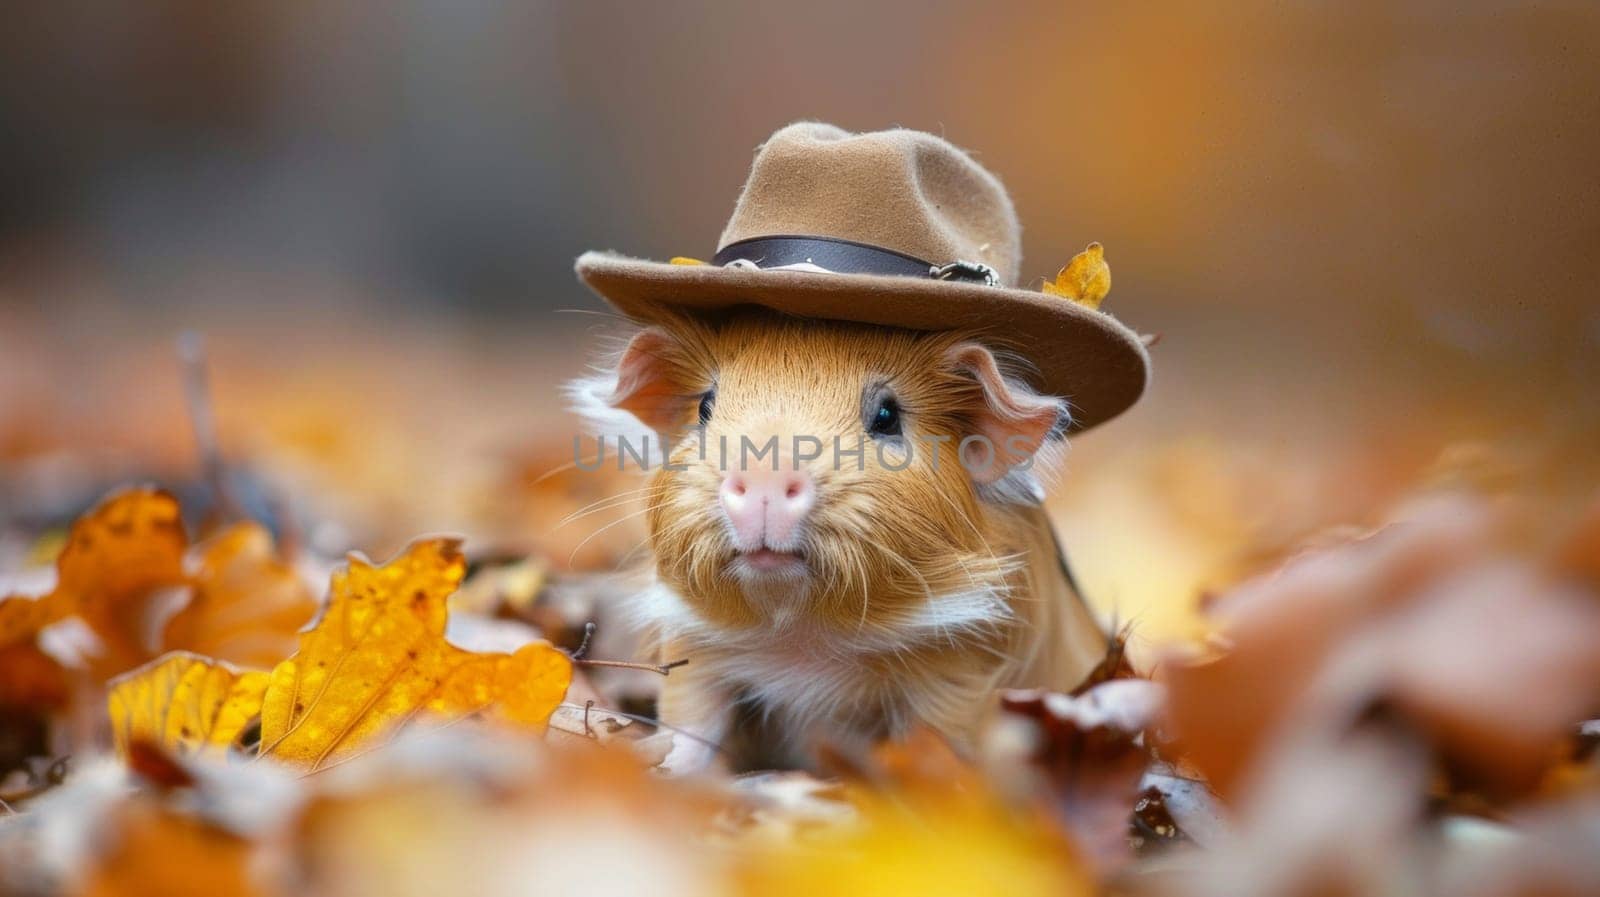 A small brown and white guinea pig wearing a hat in the leaves, AI by starush